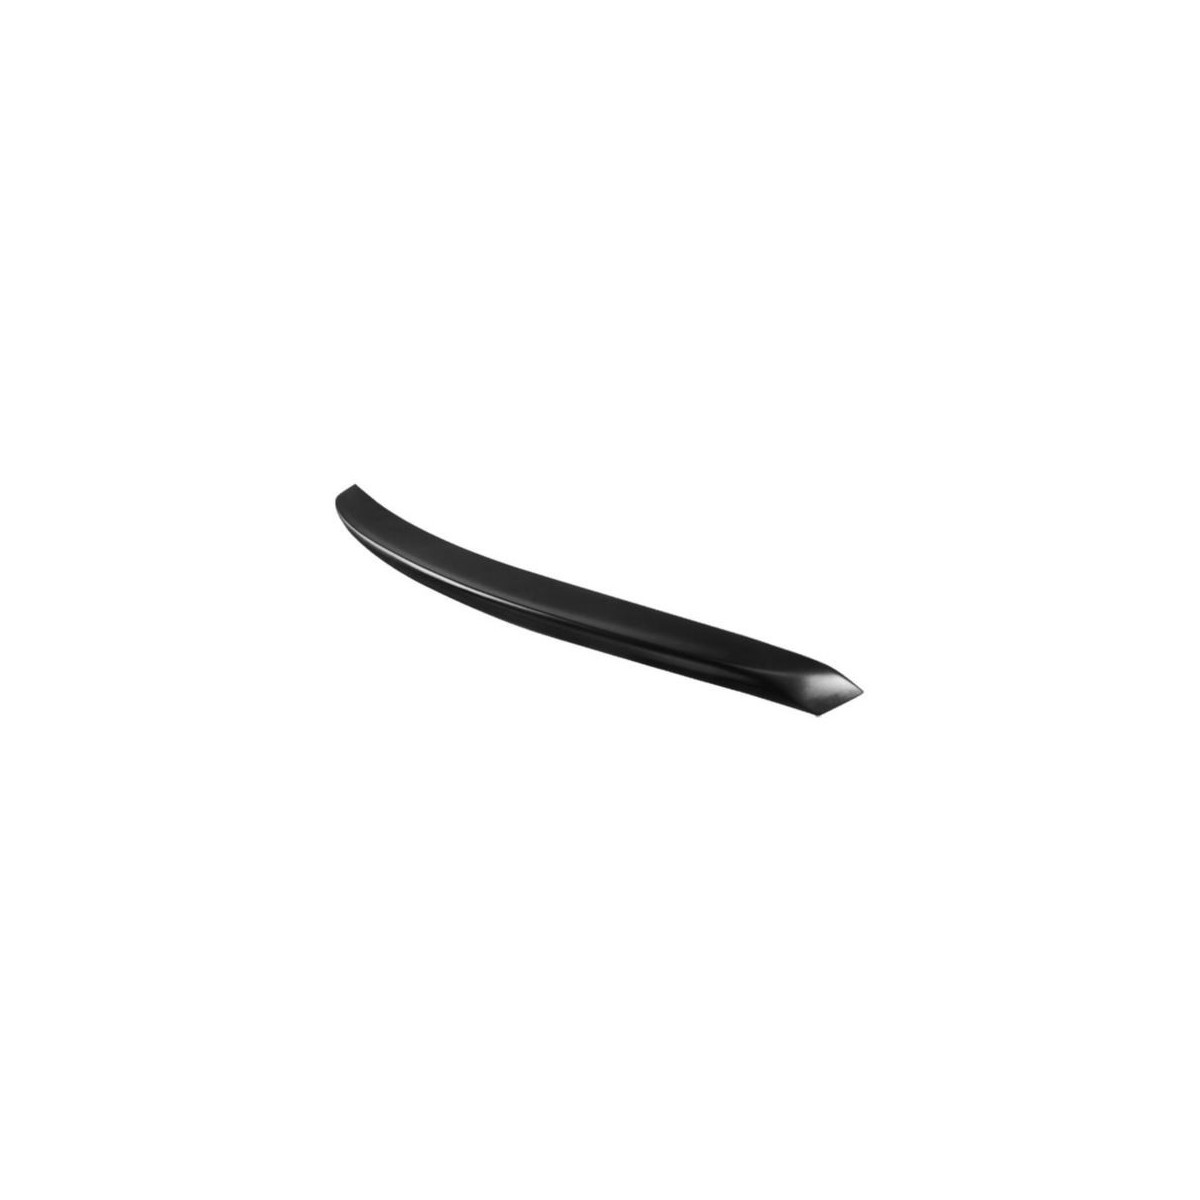 SPOILER MERCEDES W221 06-11 TRUNK ABS GLOSSY BLACK